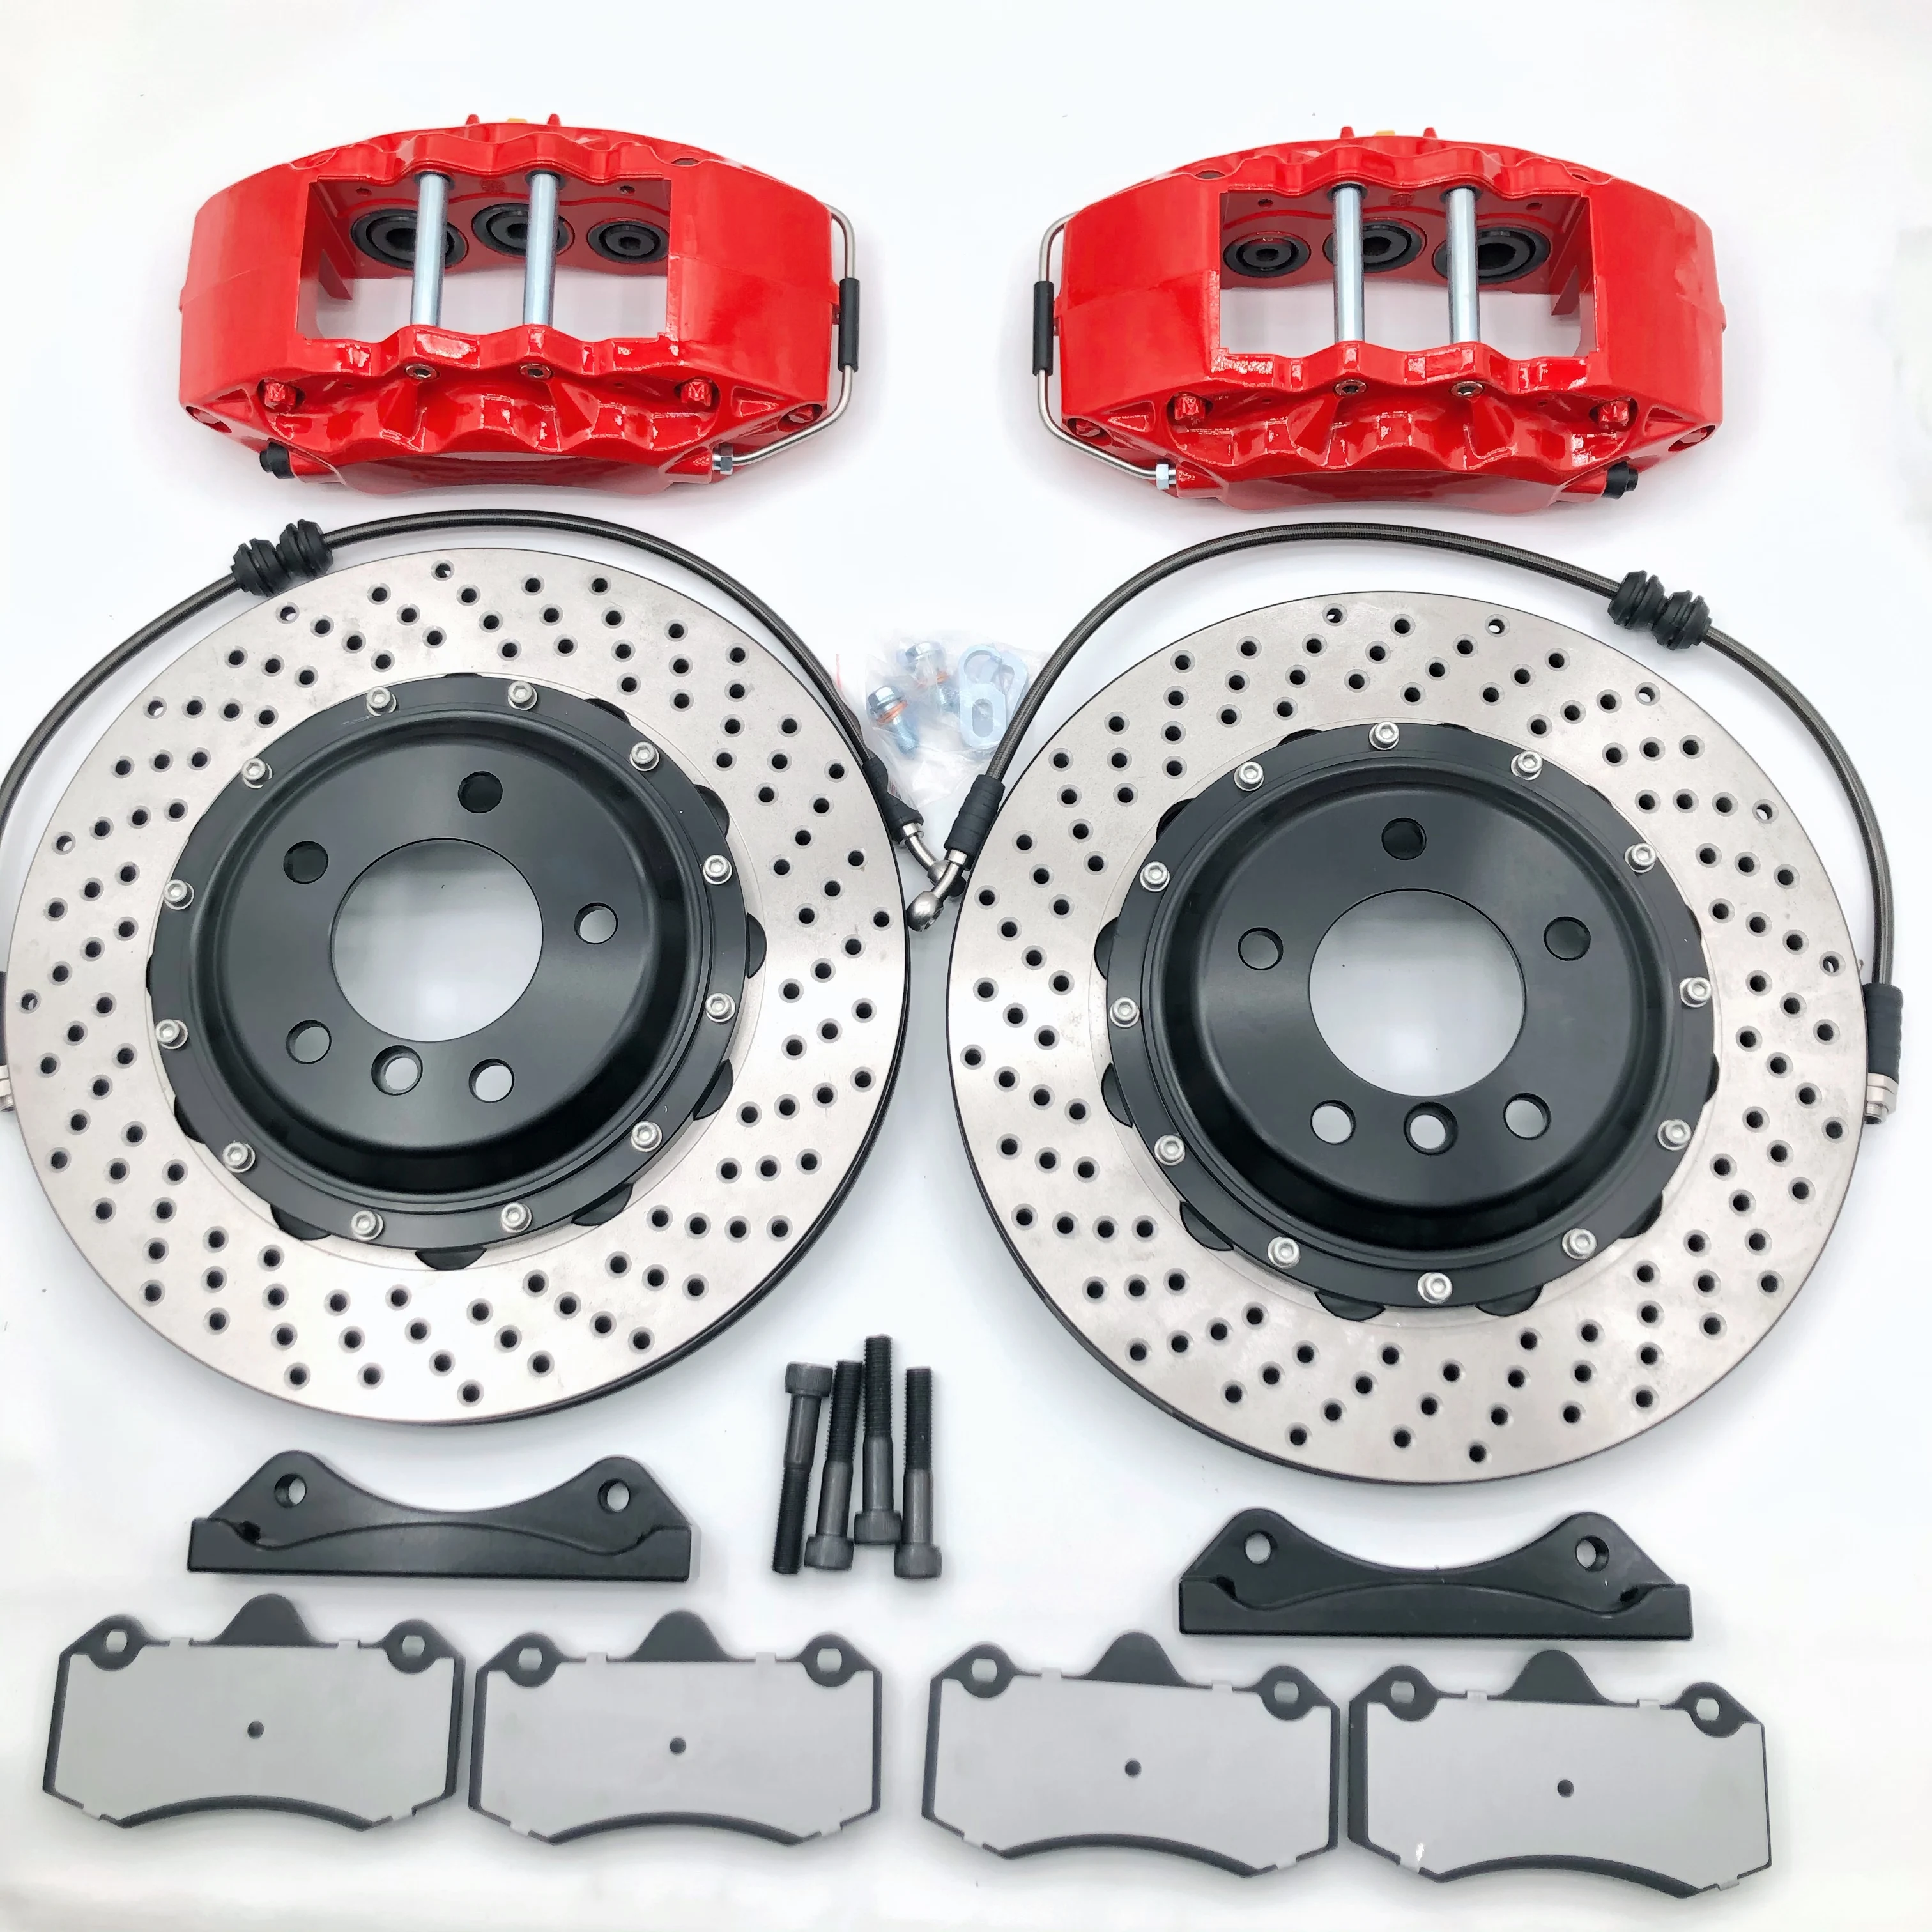 

Jekit car high quality 9040 brake kit with 355x32mm rotor for RX7/RX8 front rim18